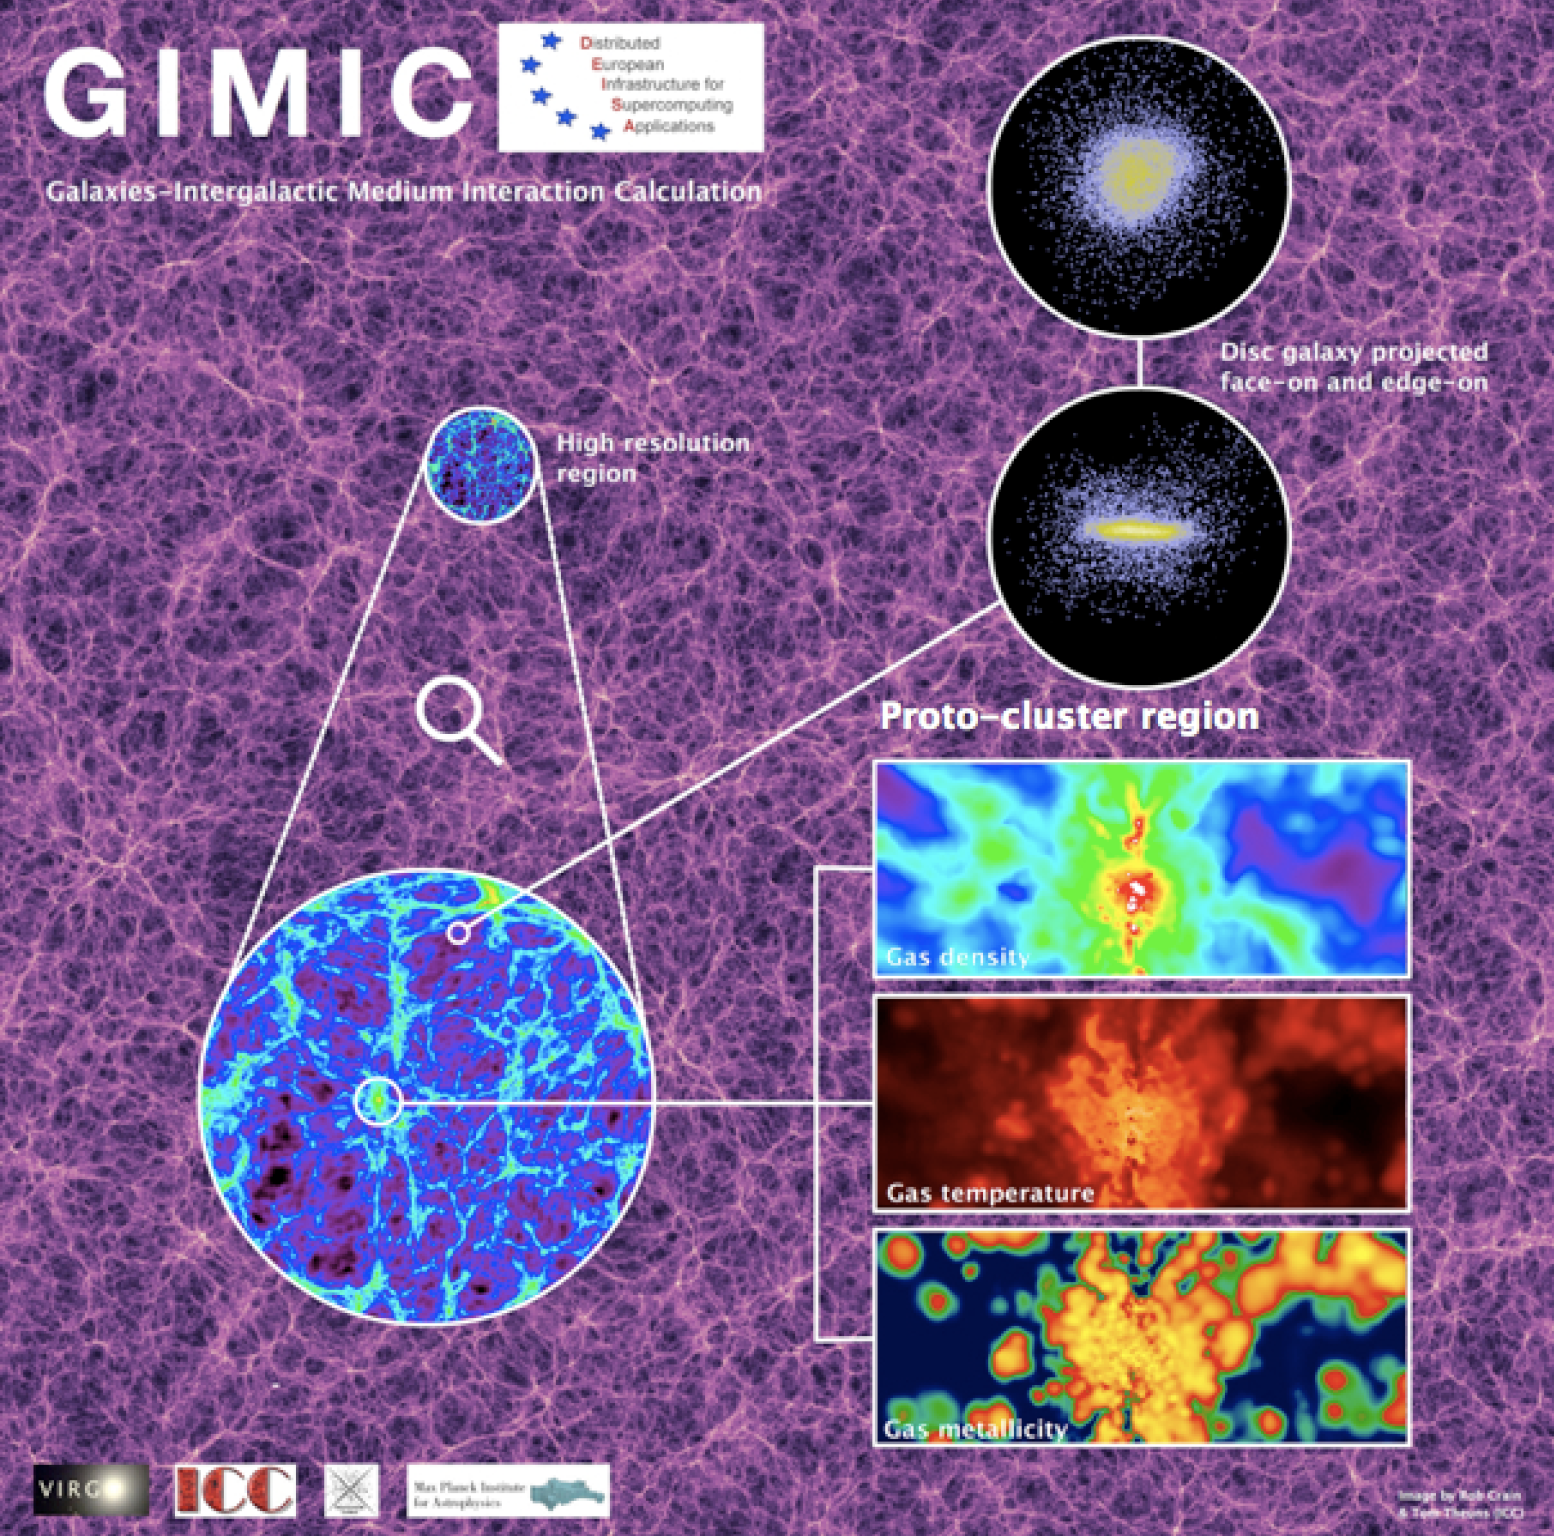 The GIMIC Project